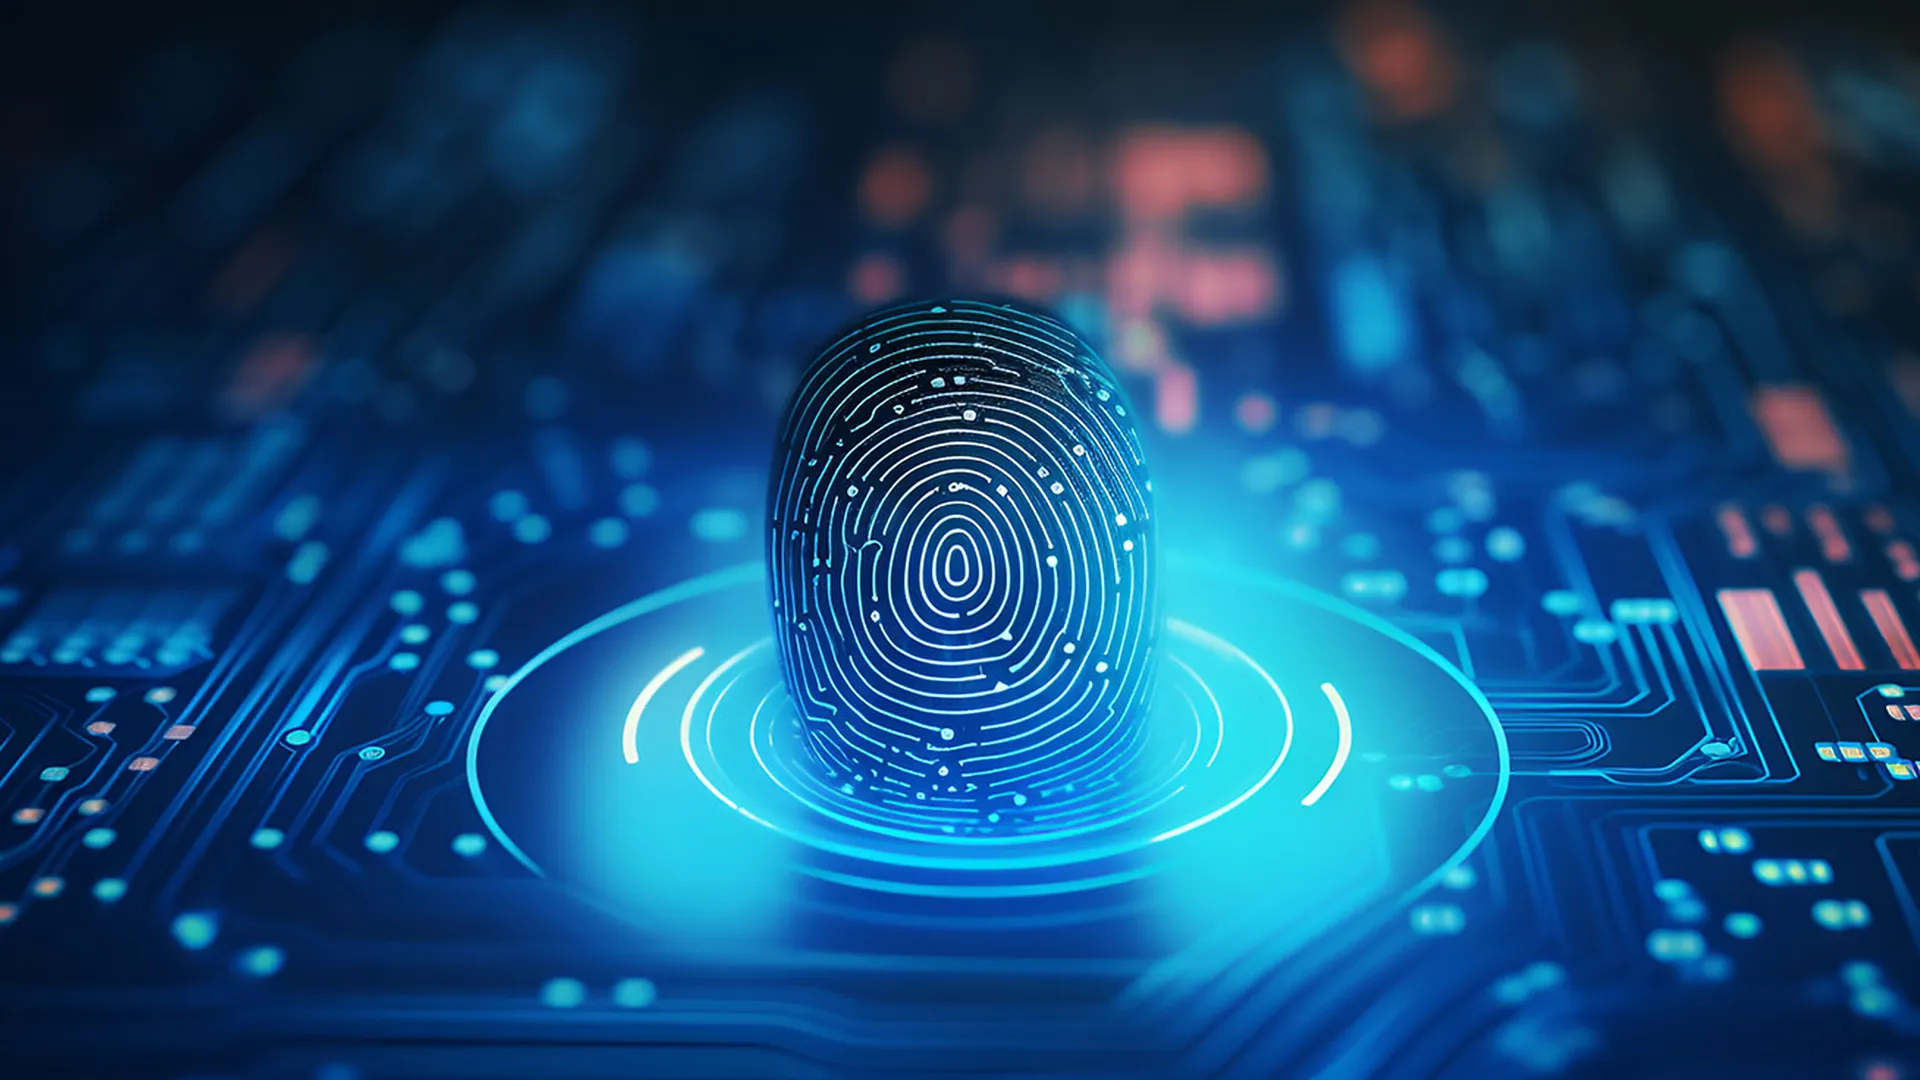 a fingerprint on a circuit board, Cloud backup and cyber security